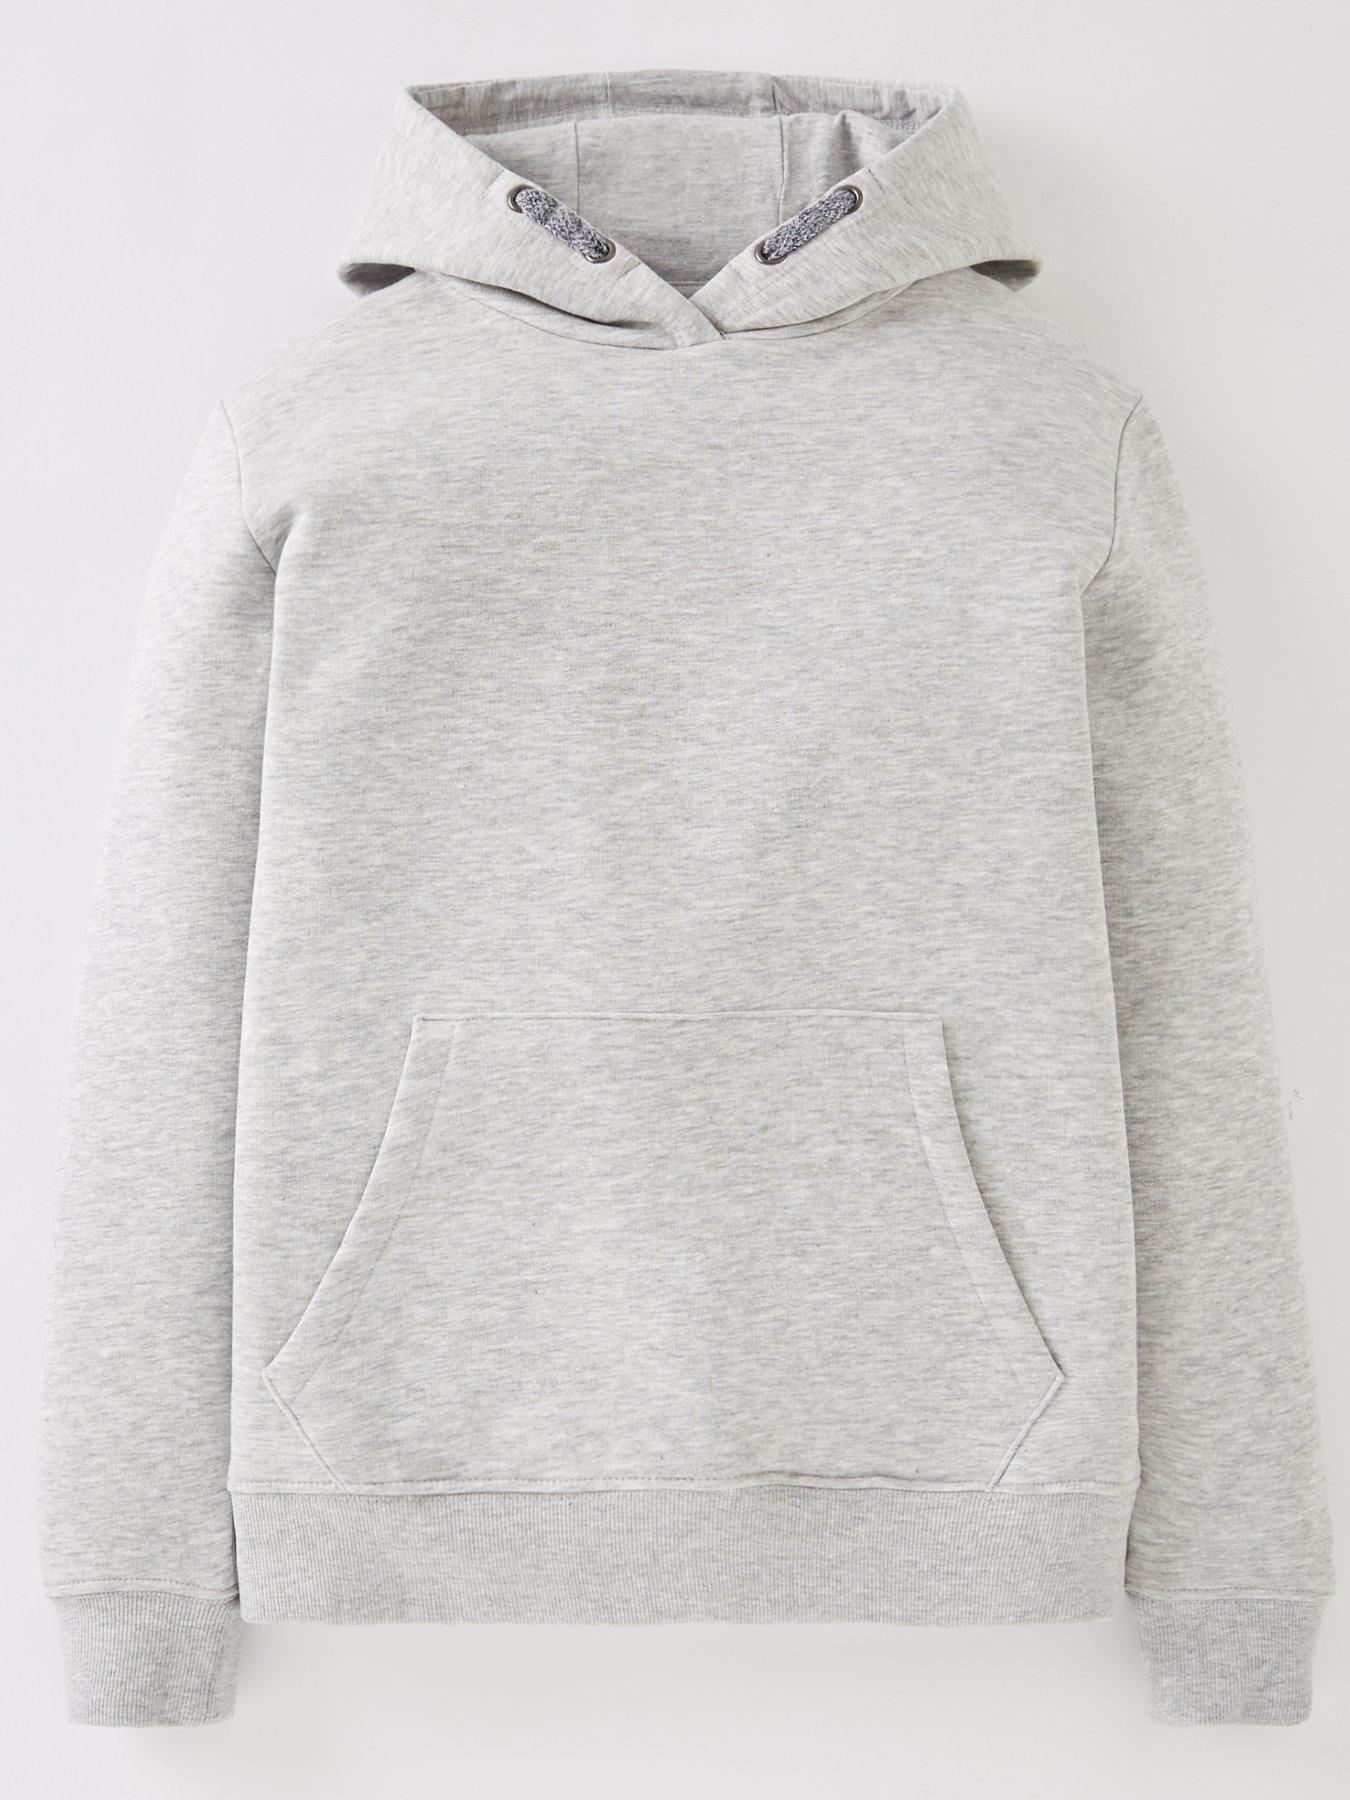 Boys Jack And Jones Brushback Fleece Overhead Hoodie Sizes Age from 7 to 16 Yrs 